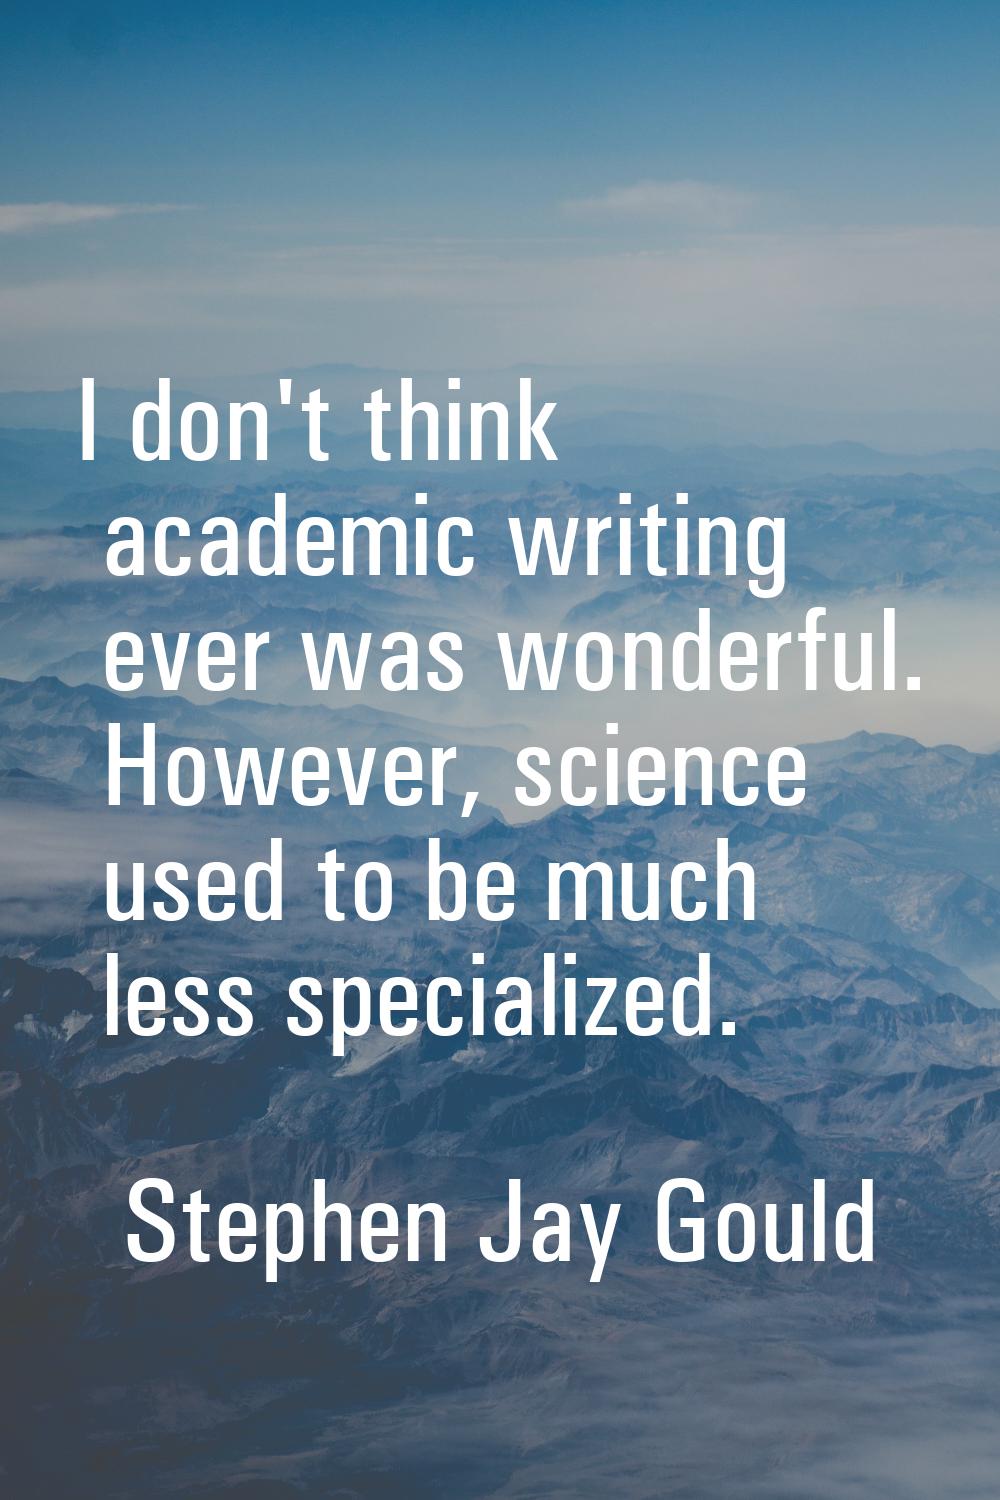 I don't think academic writing ever was wonderful. However, science used to be much less specialize